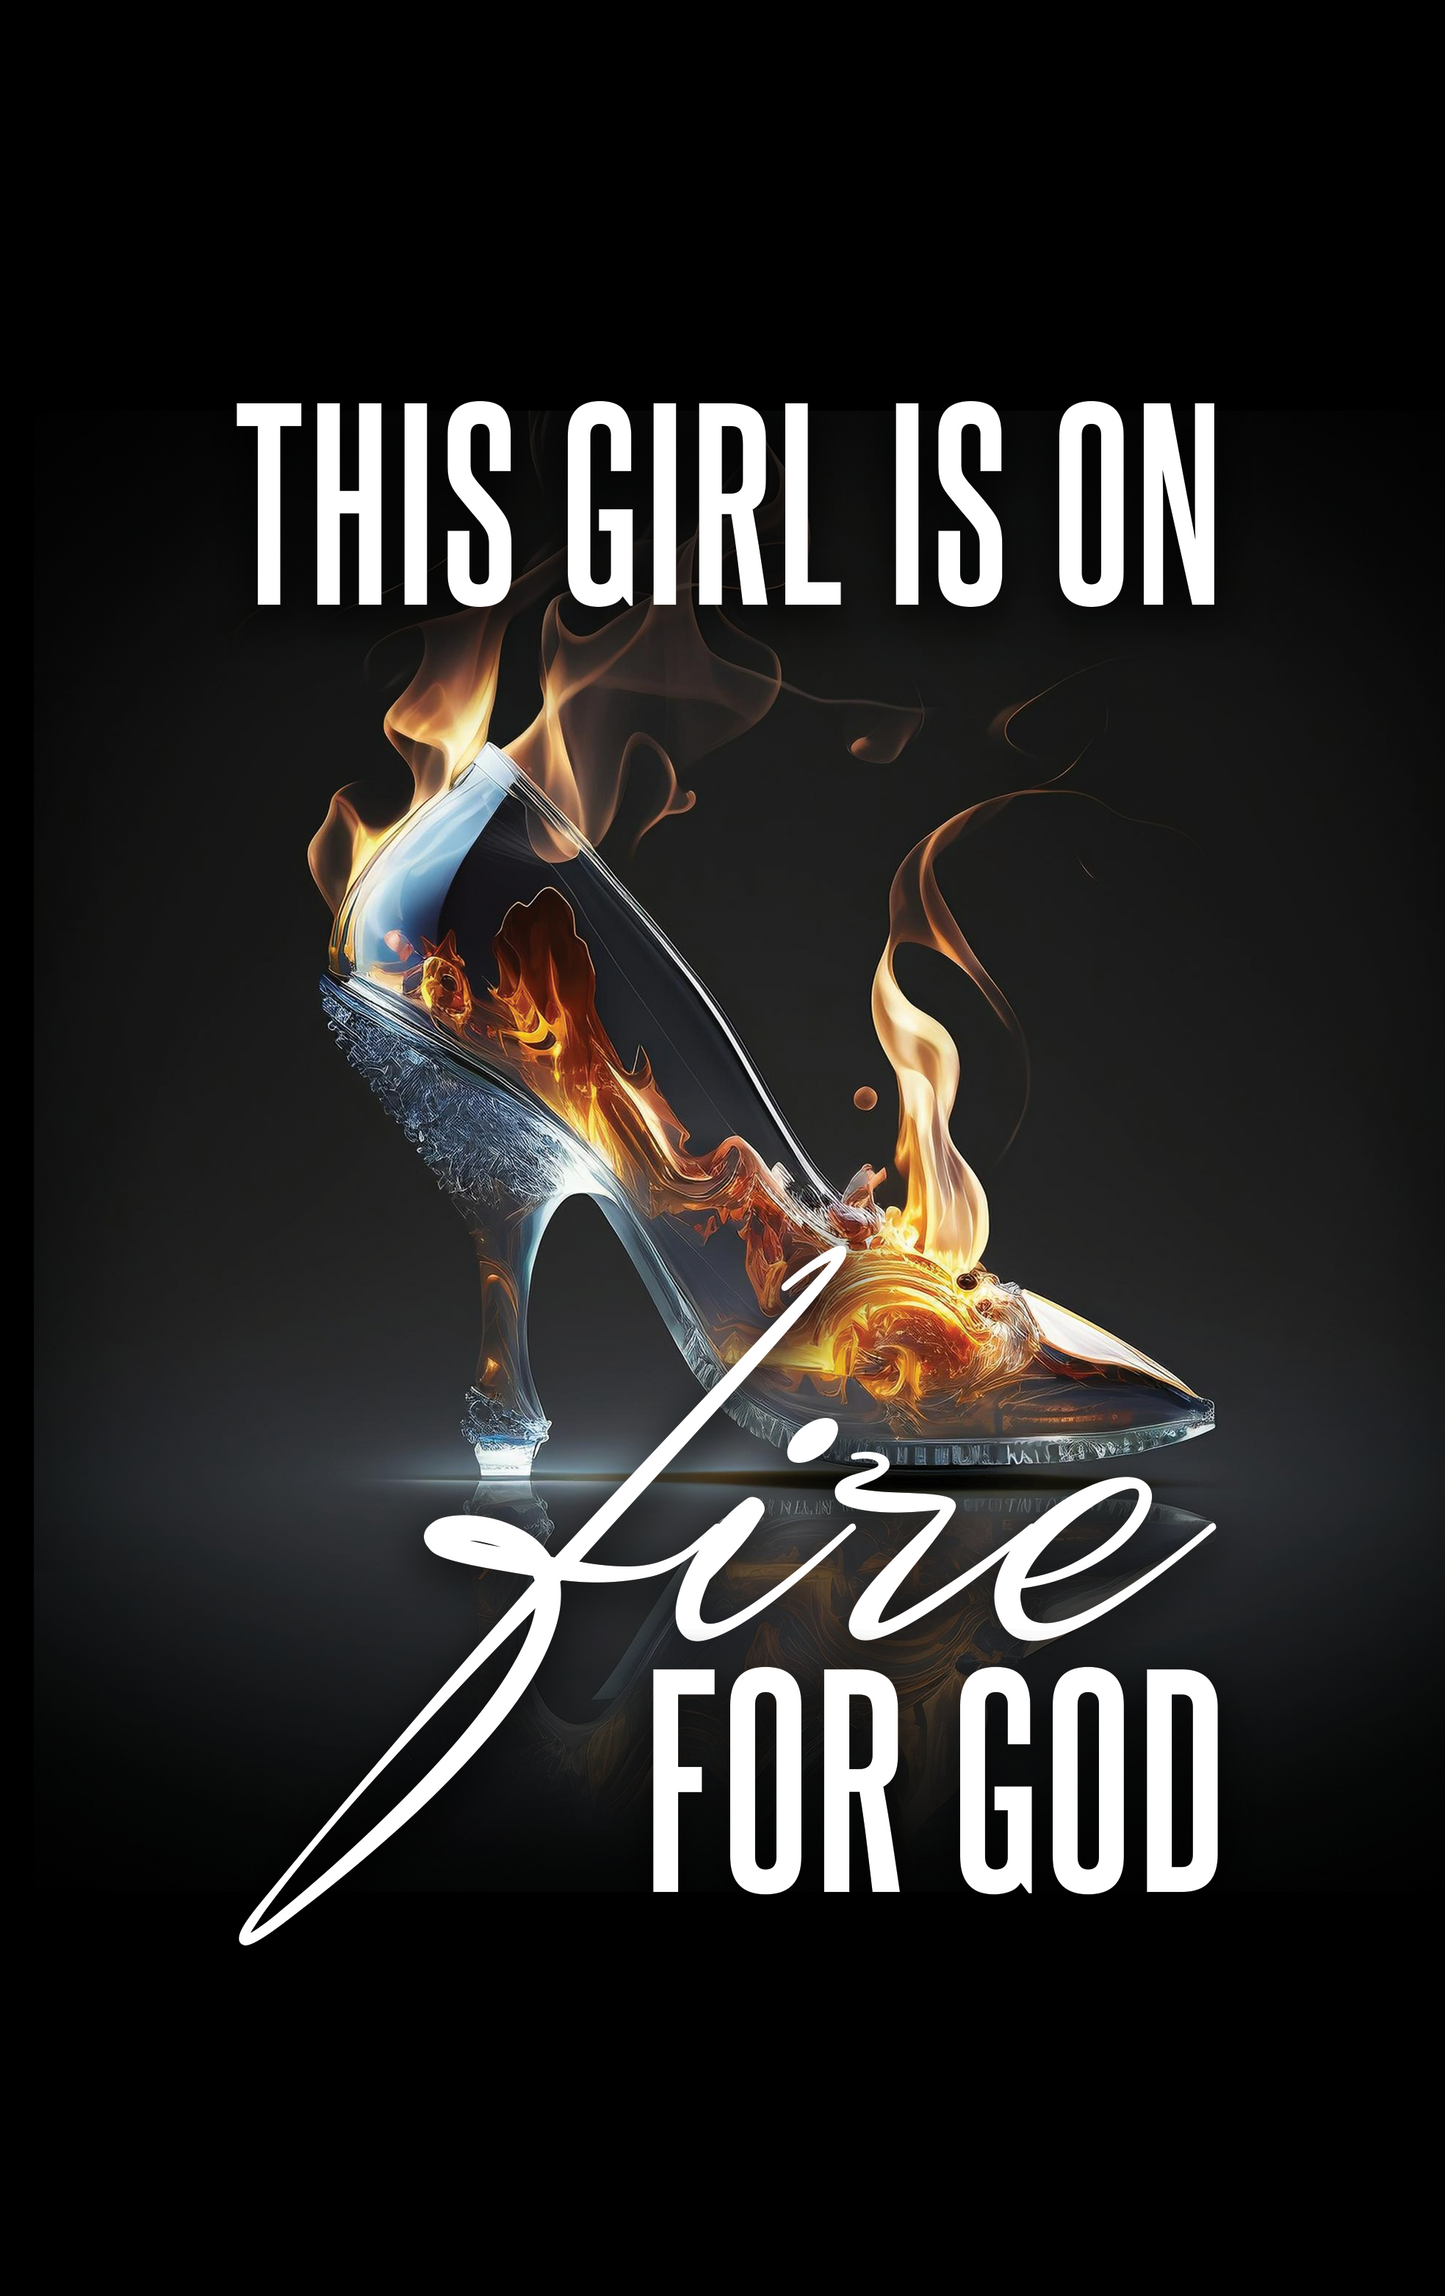 This Girl Is On Fire (Journal)  - by GirlClergy